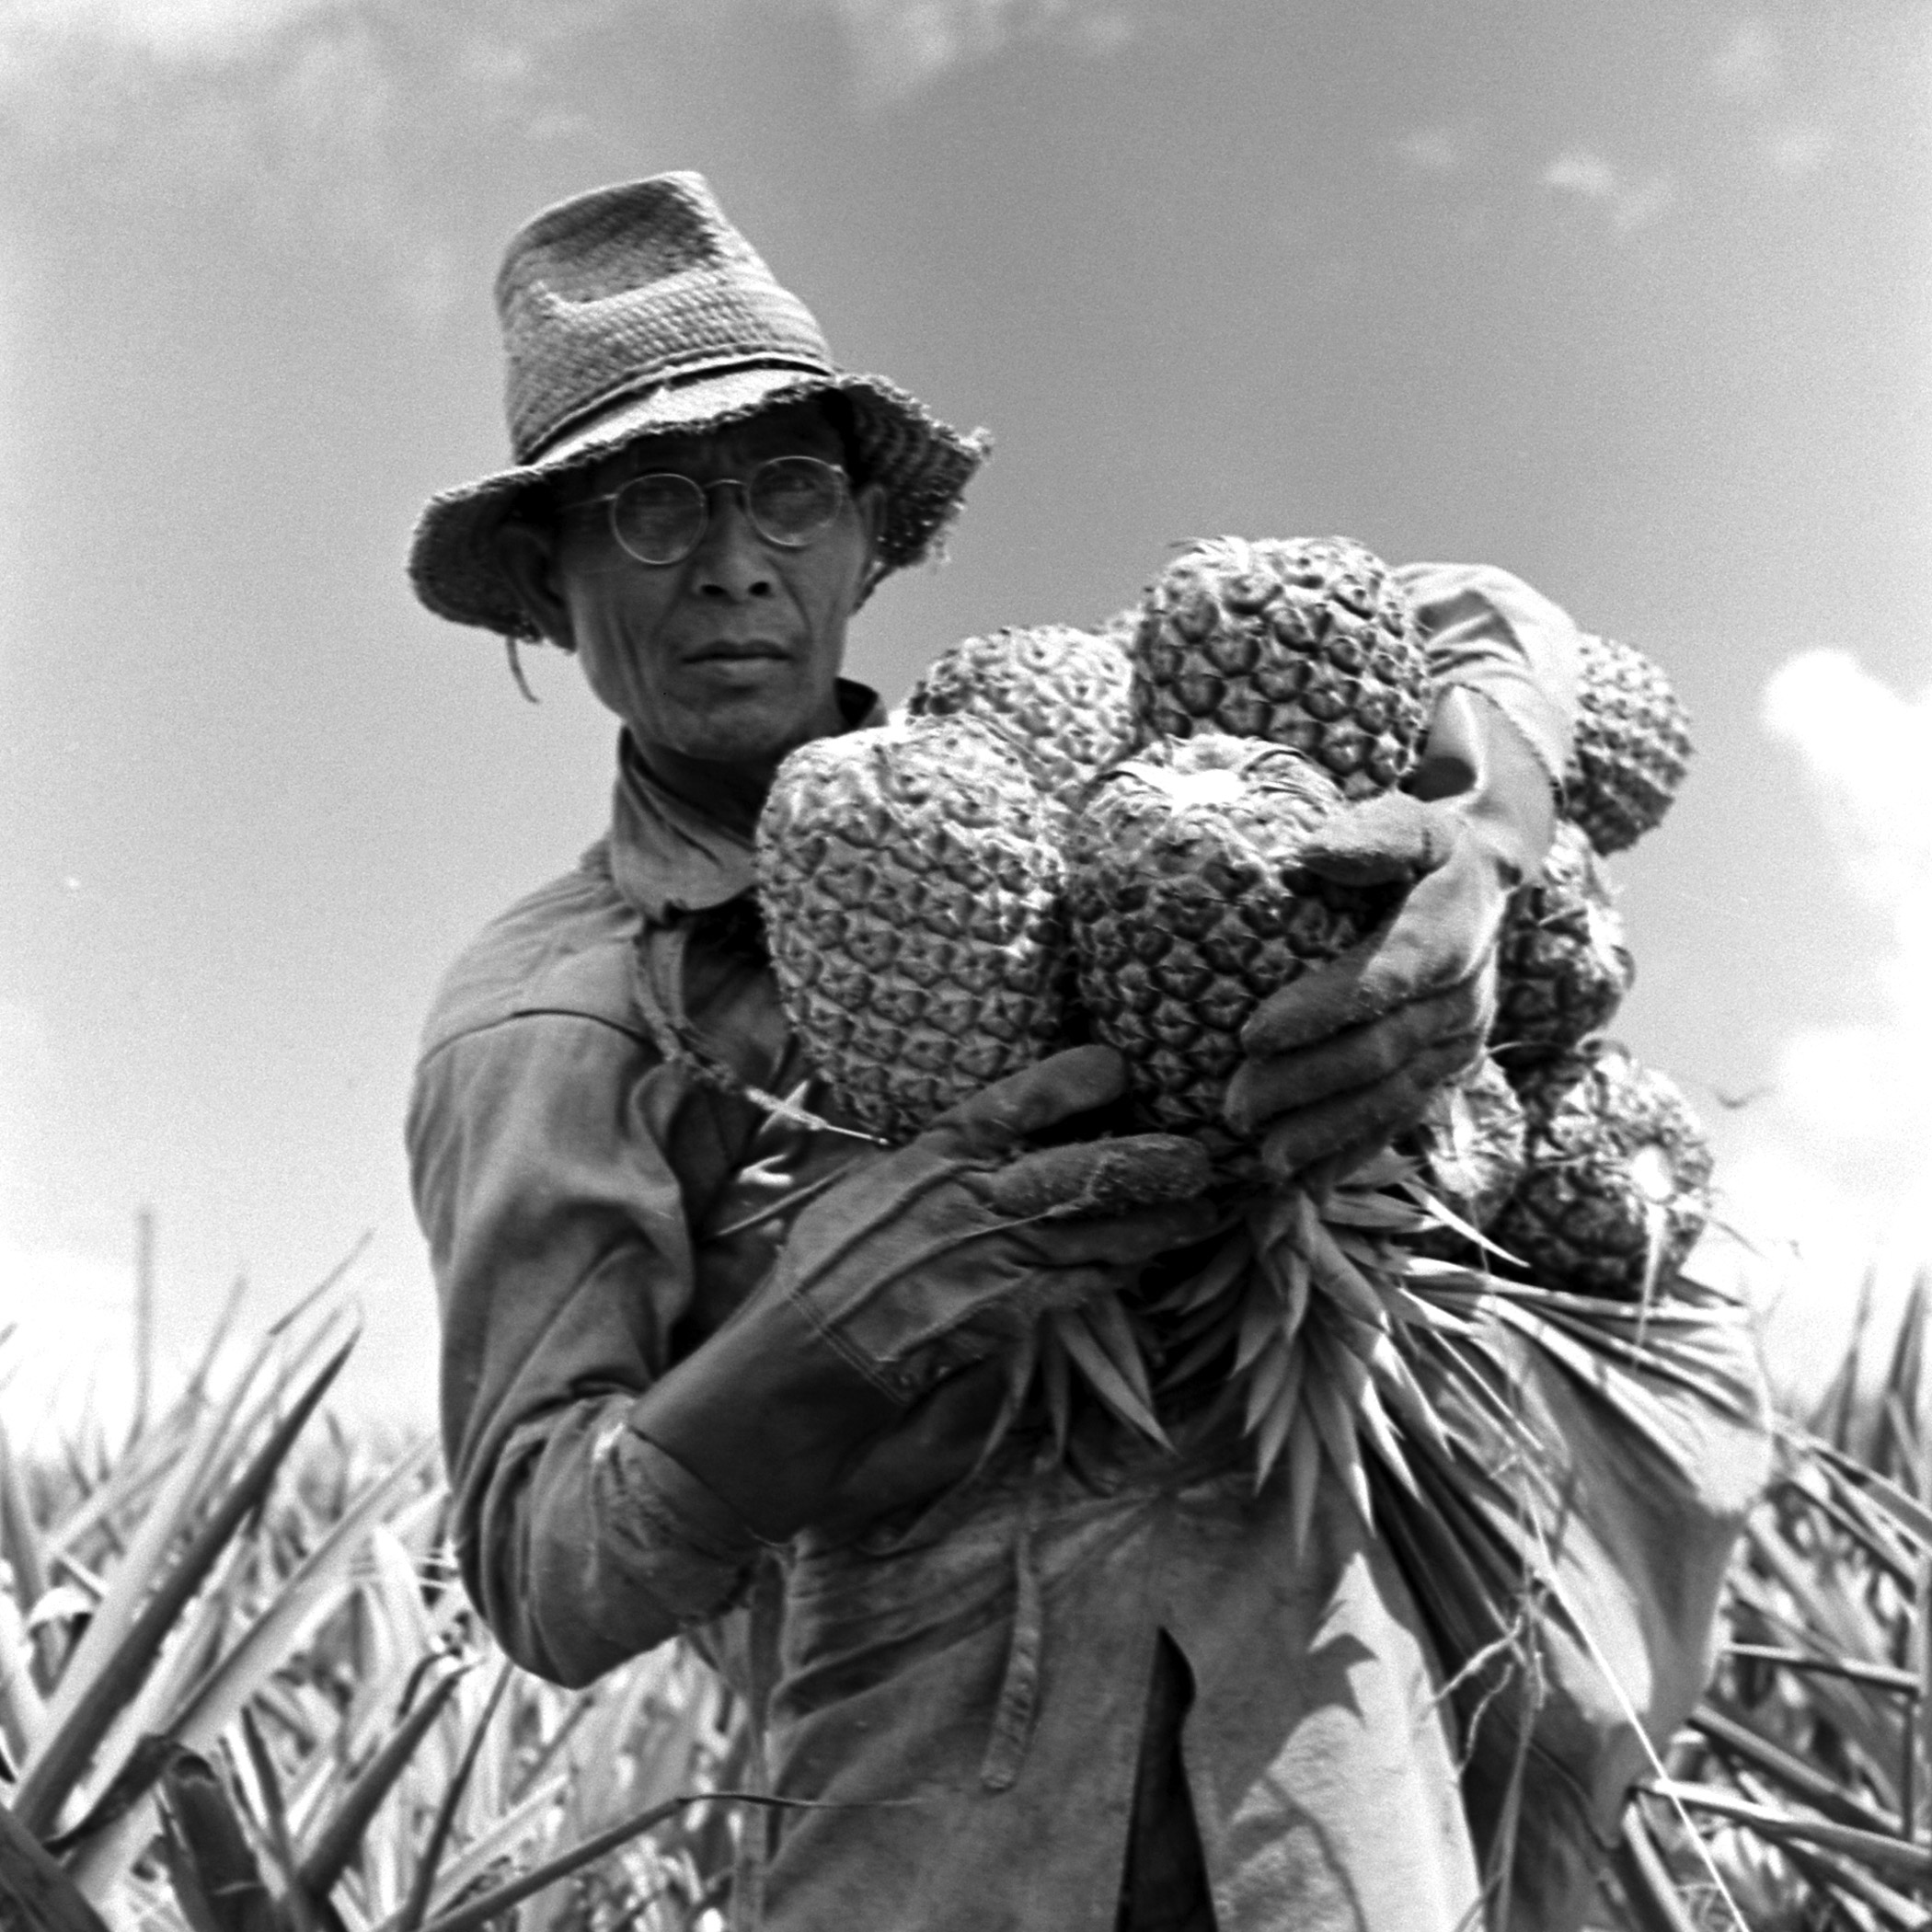 A worker on the Dole plantation in Hawaii.